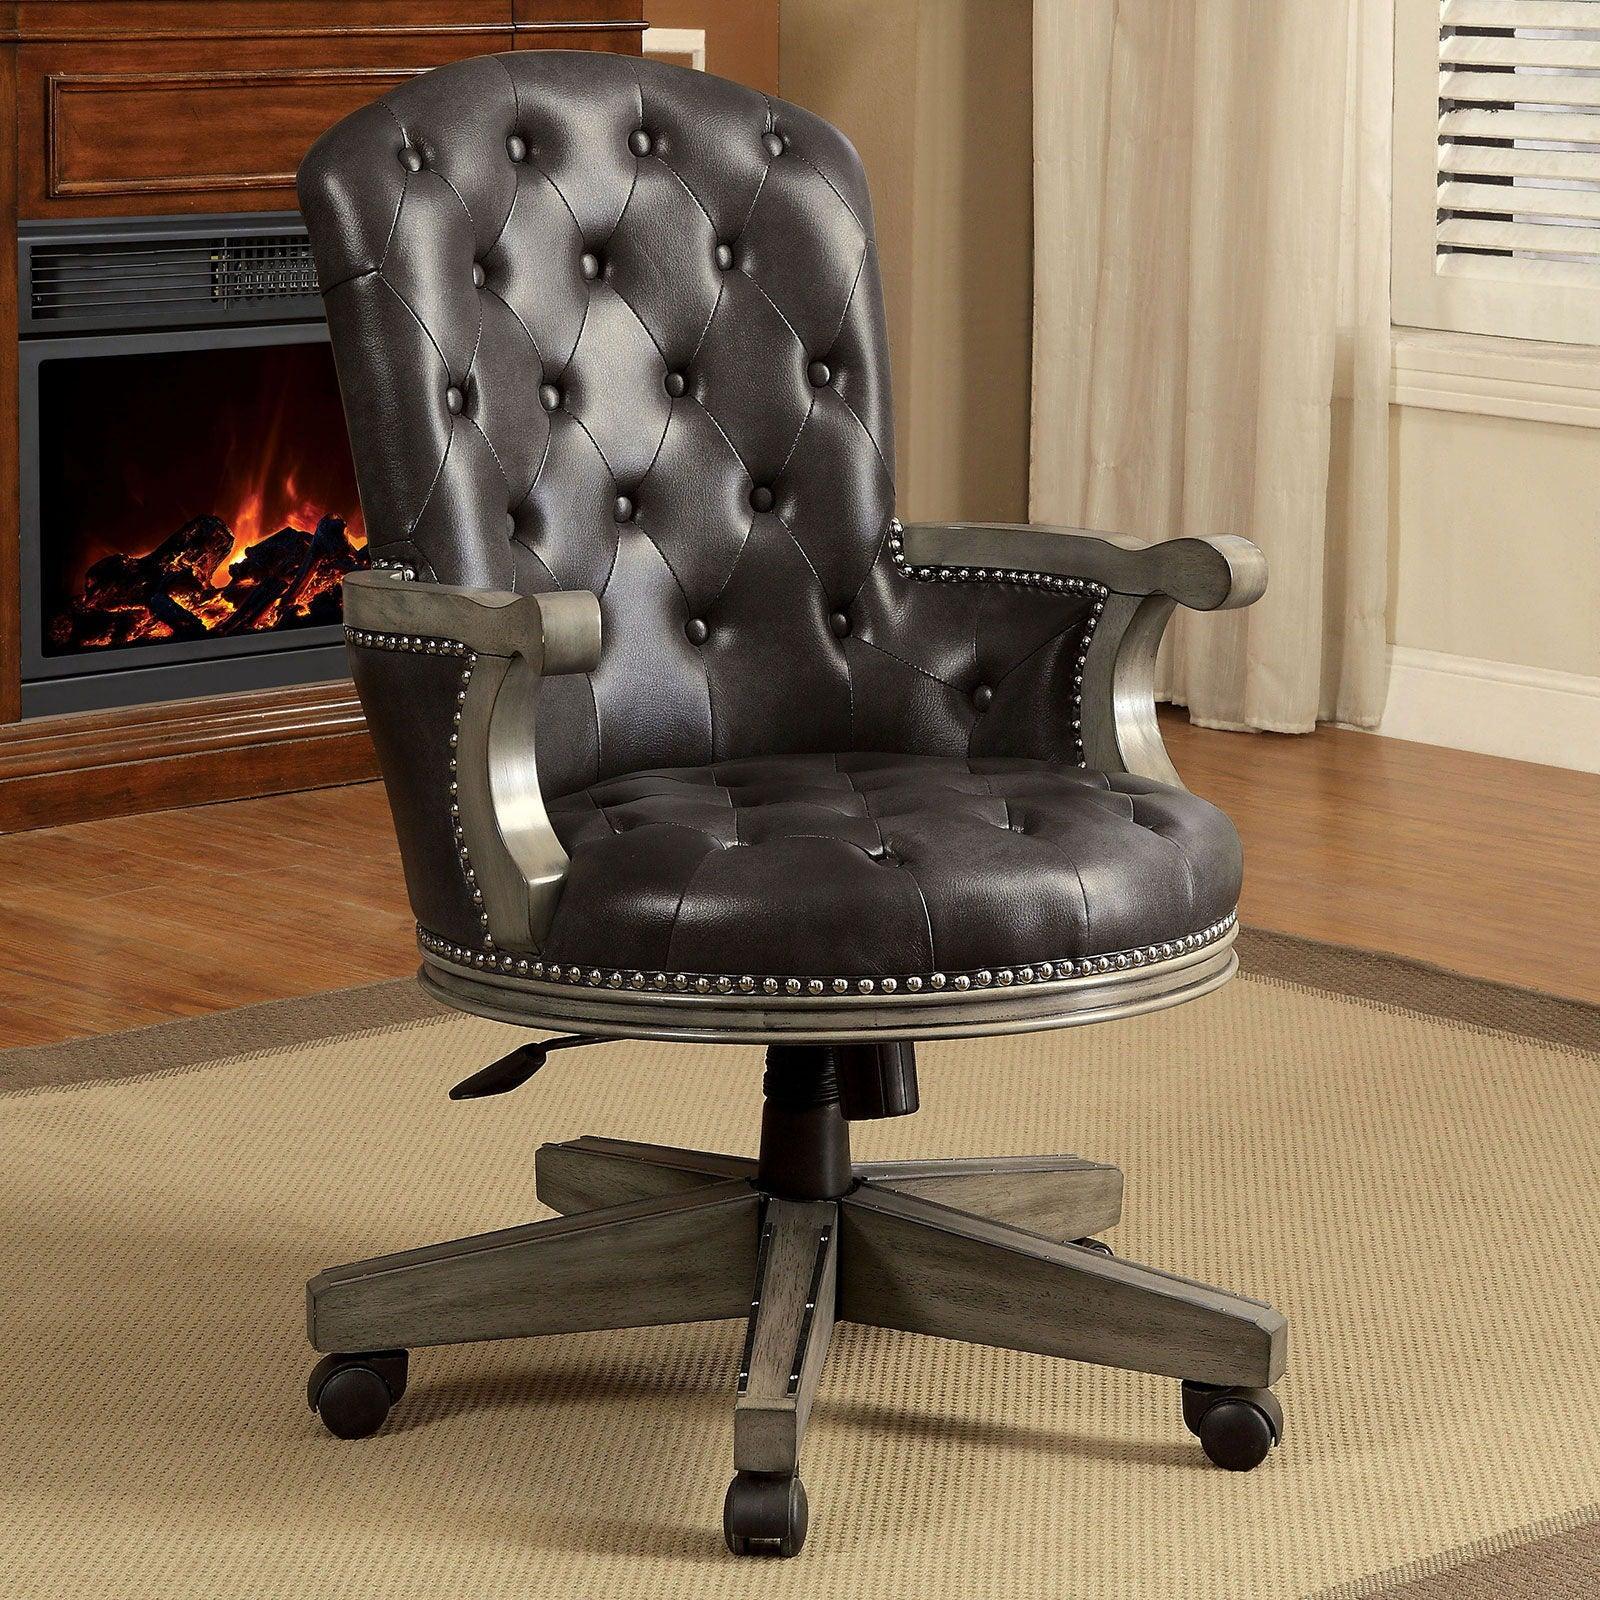 Furniture of America - Yelena - Height - Adjustable Arm Chair - Gray / Black - 5th Avenue Furniture